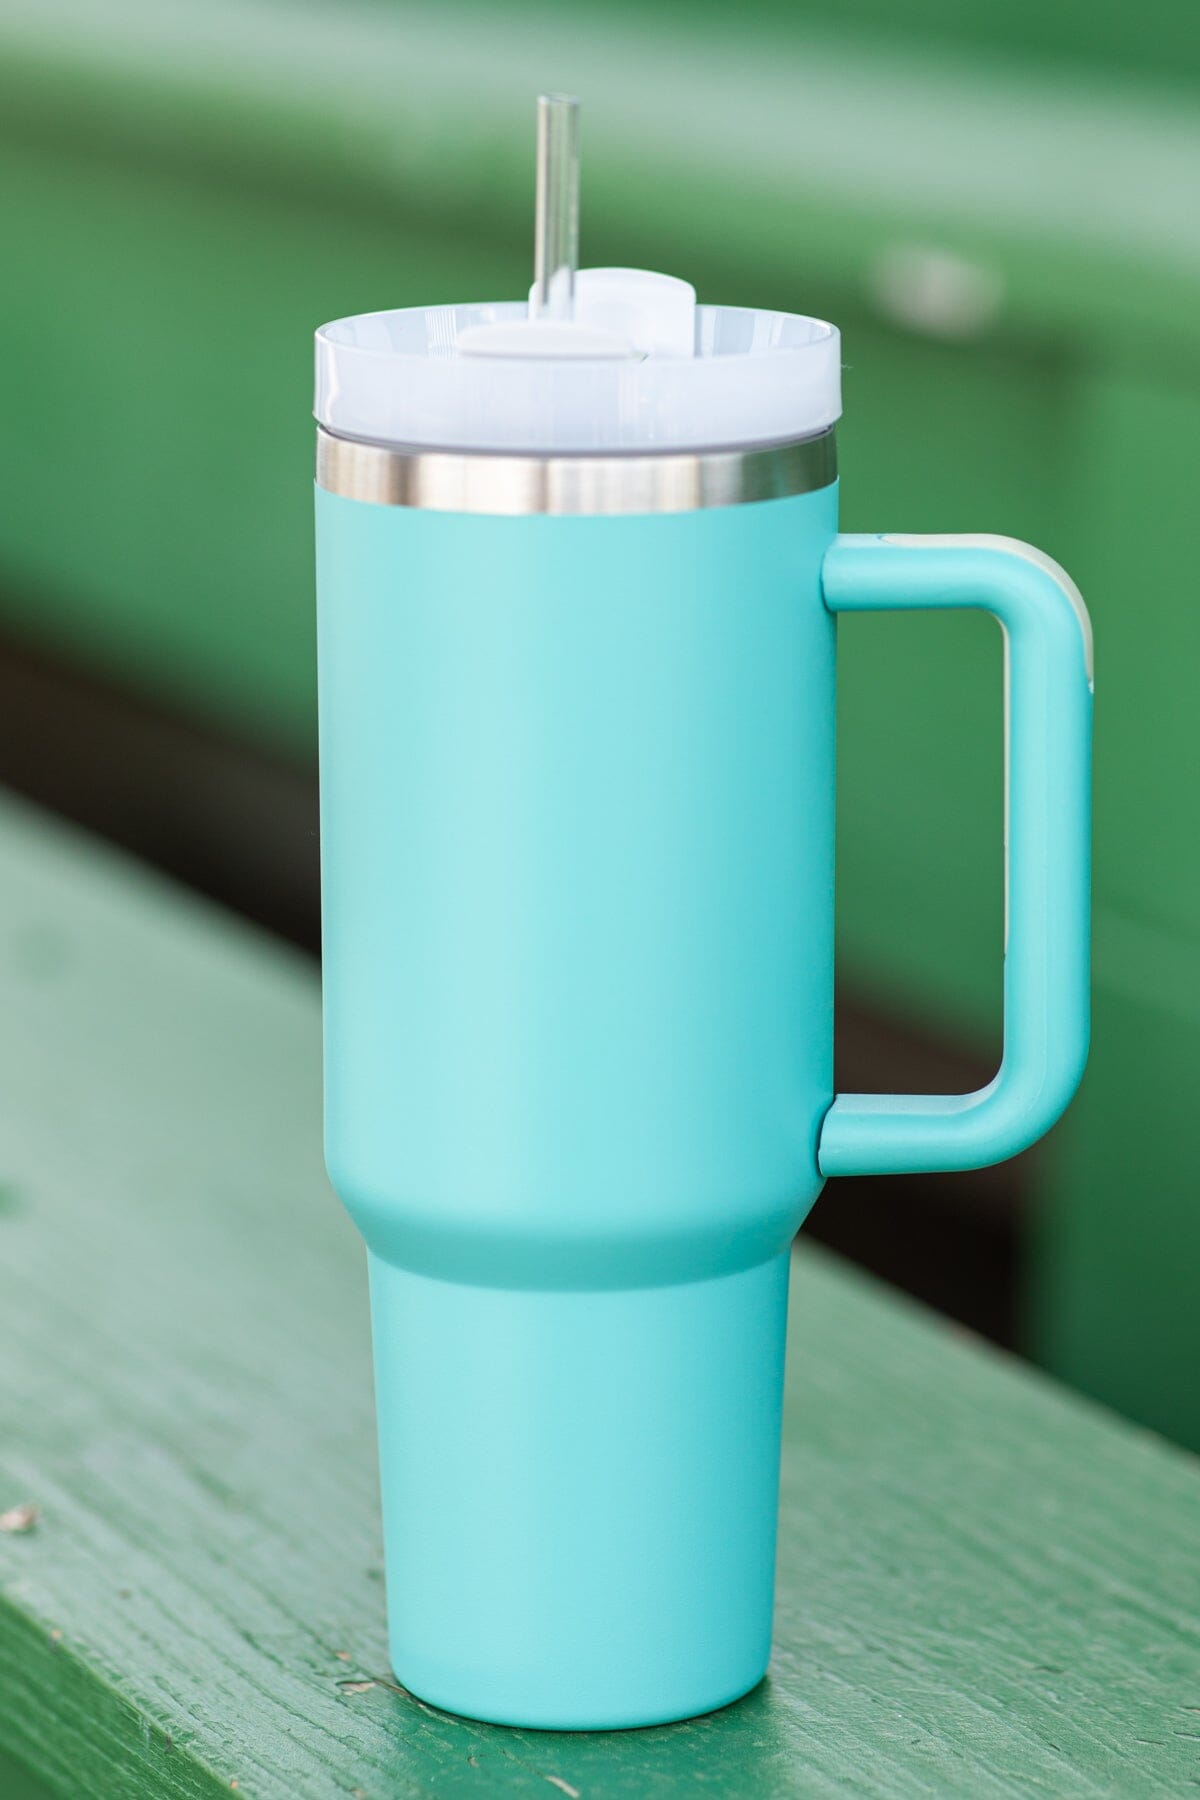 https://www.shopfillyflair.shop/wp-content/uploads/1689/96/a-wide-variety-of-light-teal-40oz-tumbler-with-handle-max-apparel-x-to-choose-from_1.jpg